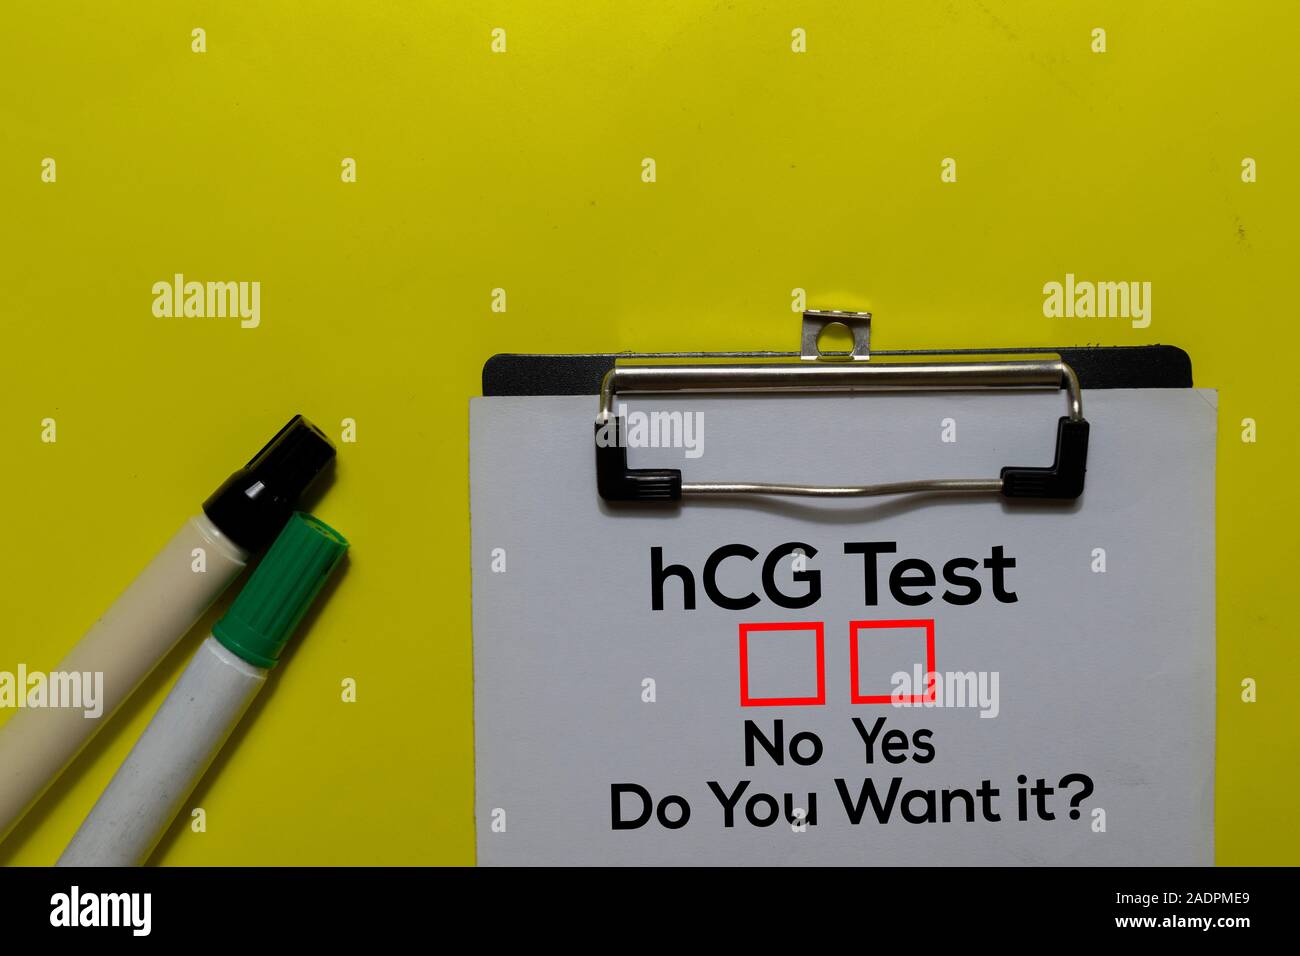 hCG Test, Do You Want it? Yes or No. On office desk background Stock Photo